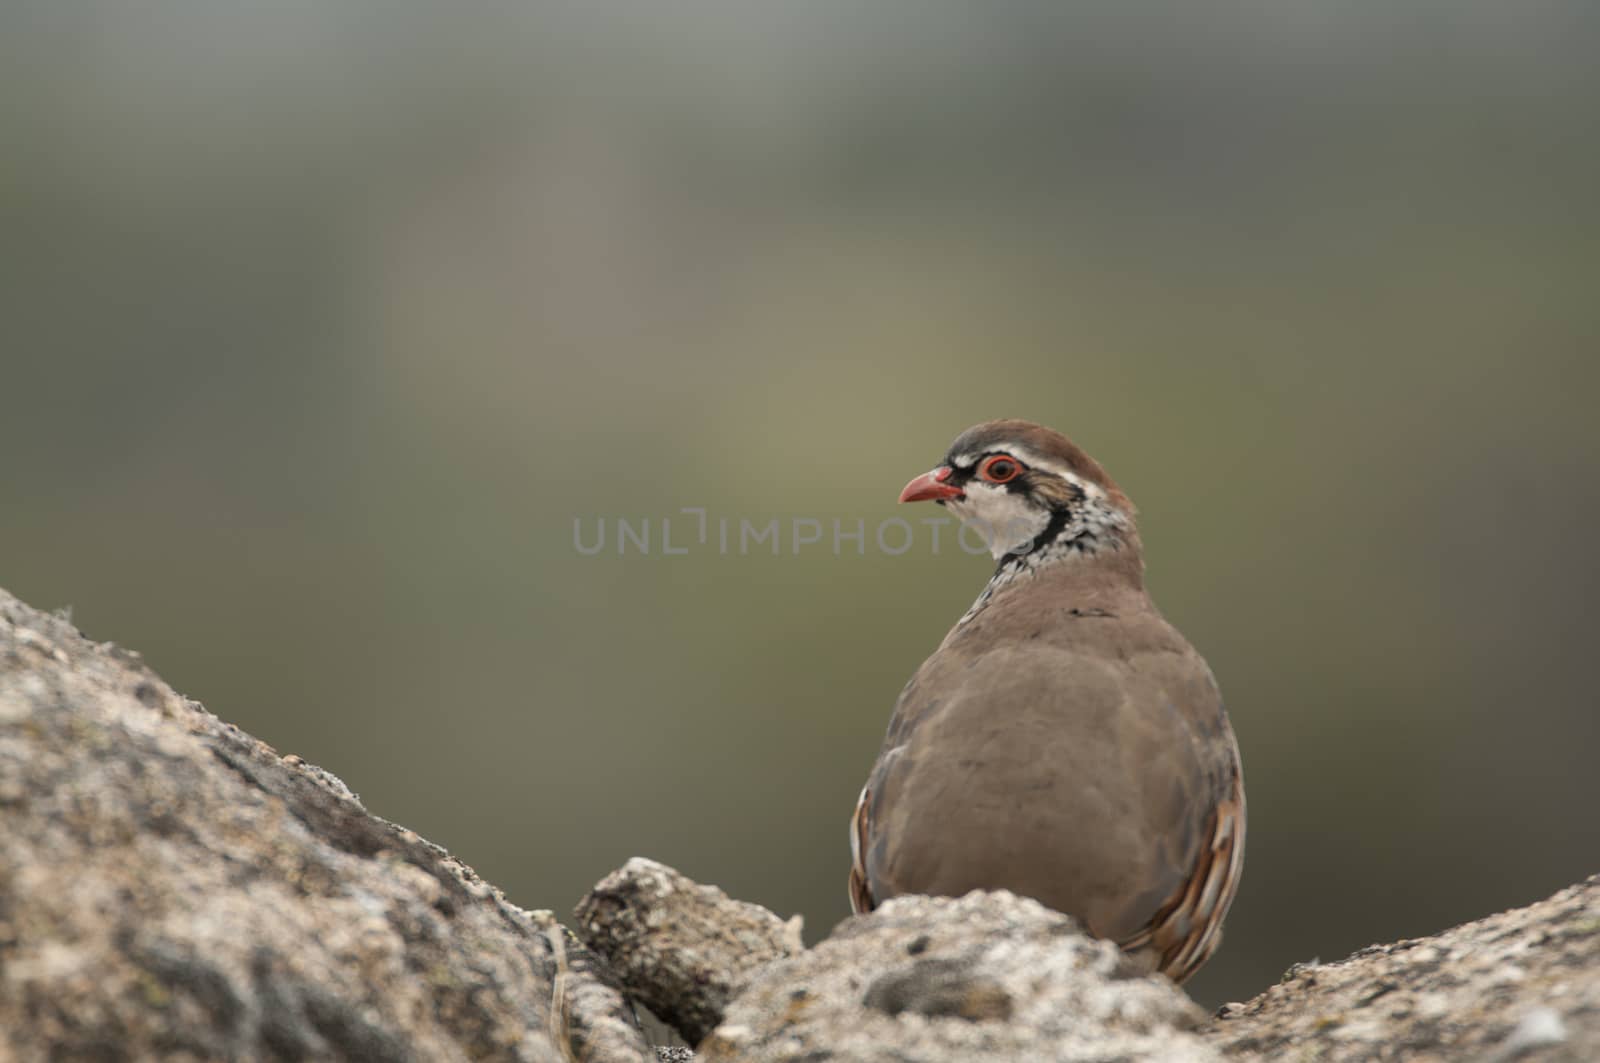 The red-legged, Alectoris rufa, resting  by jalonsohu@gmail.com